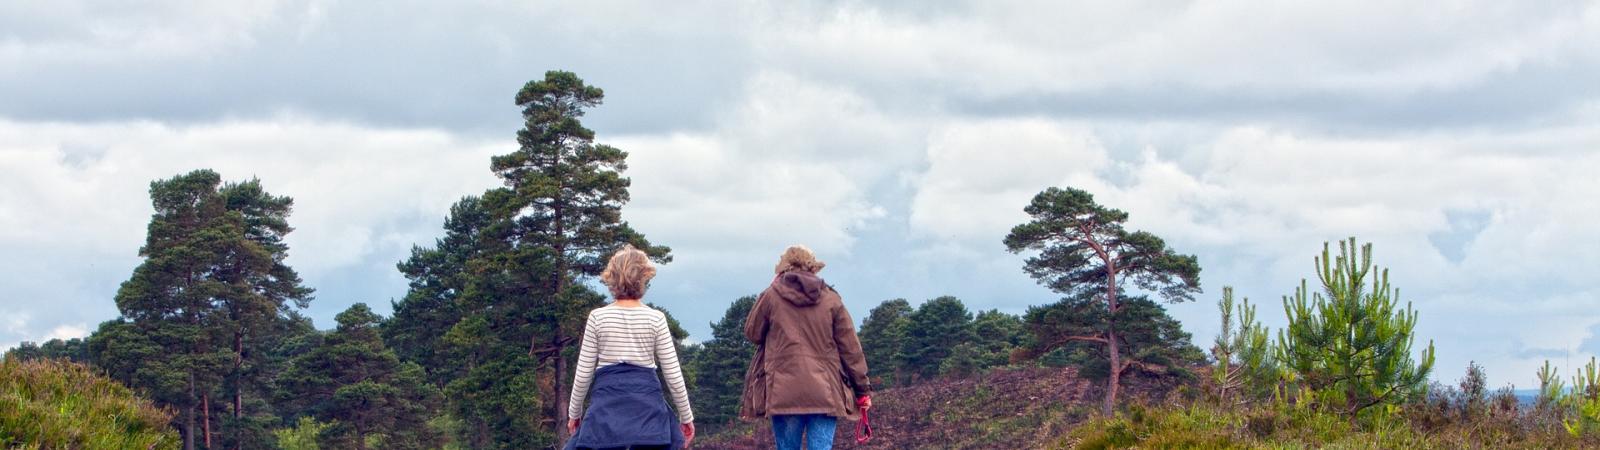 A photograph of some people walking on the heaths